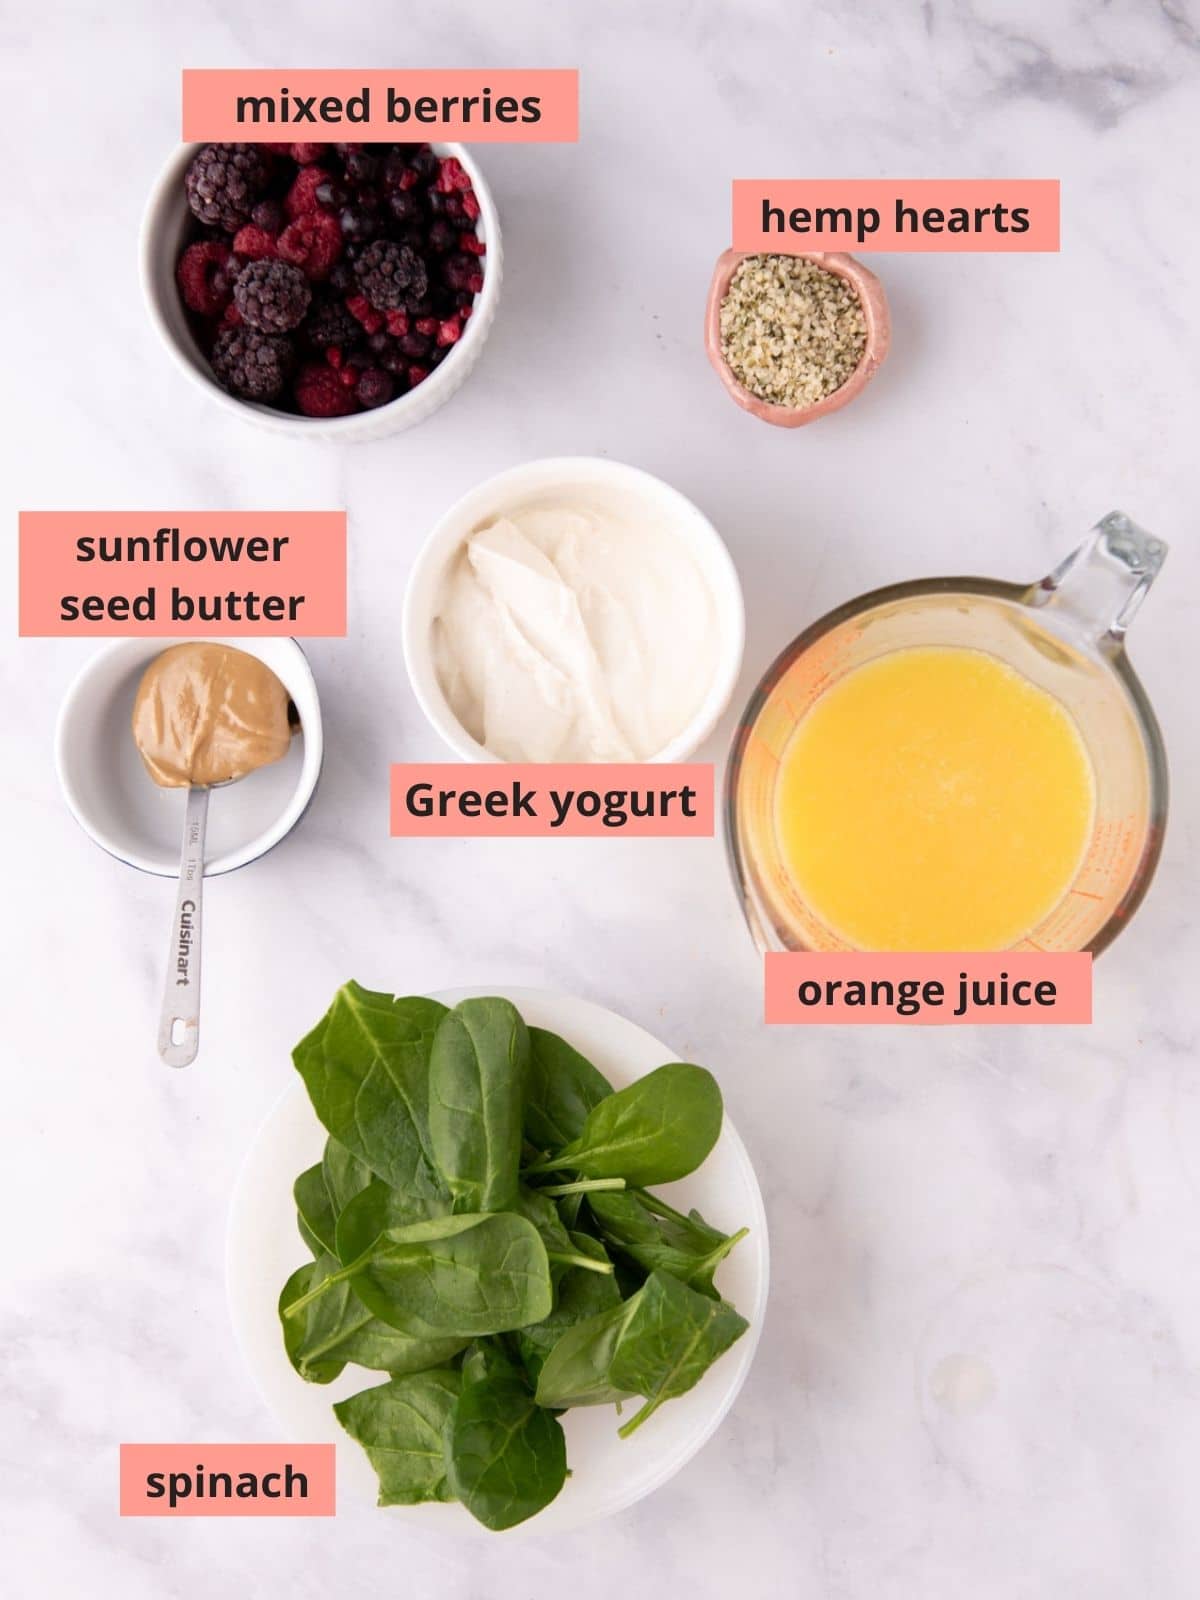 Labeled ingredients used to make triple berry smoothie.